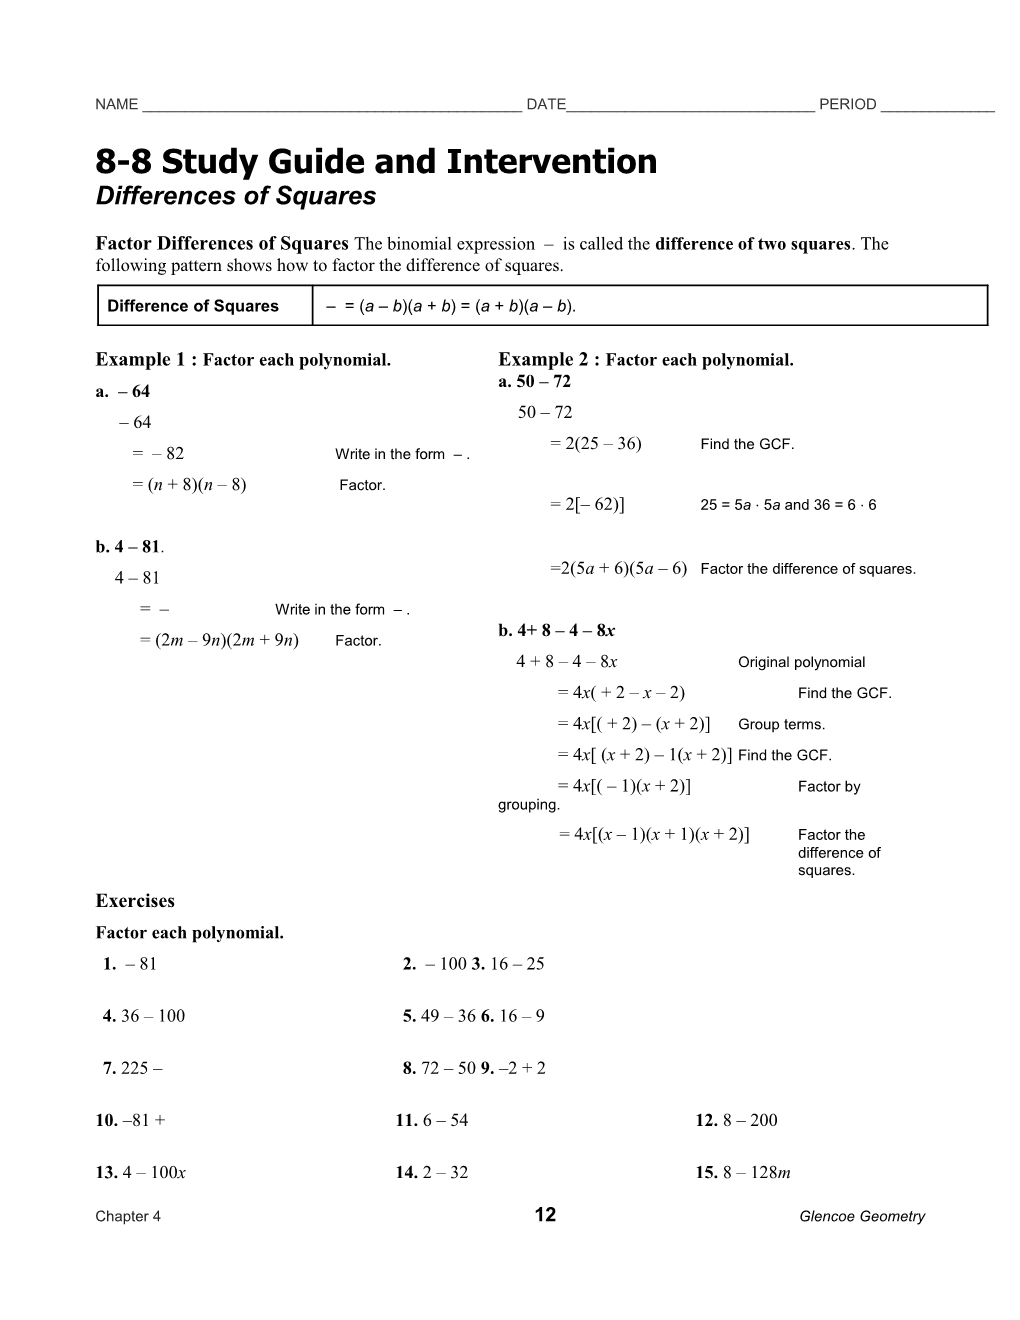 8-8 Study Guide and Intervention